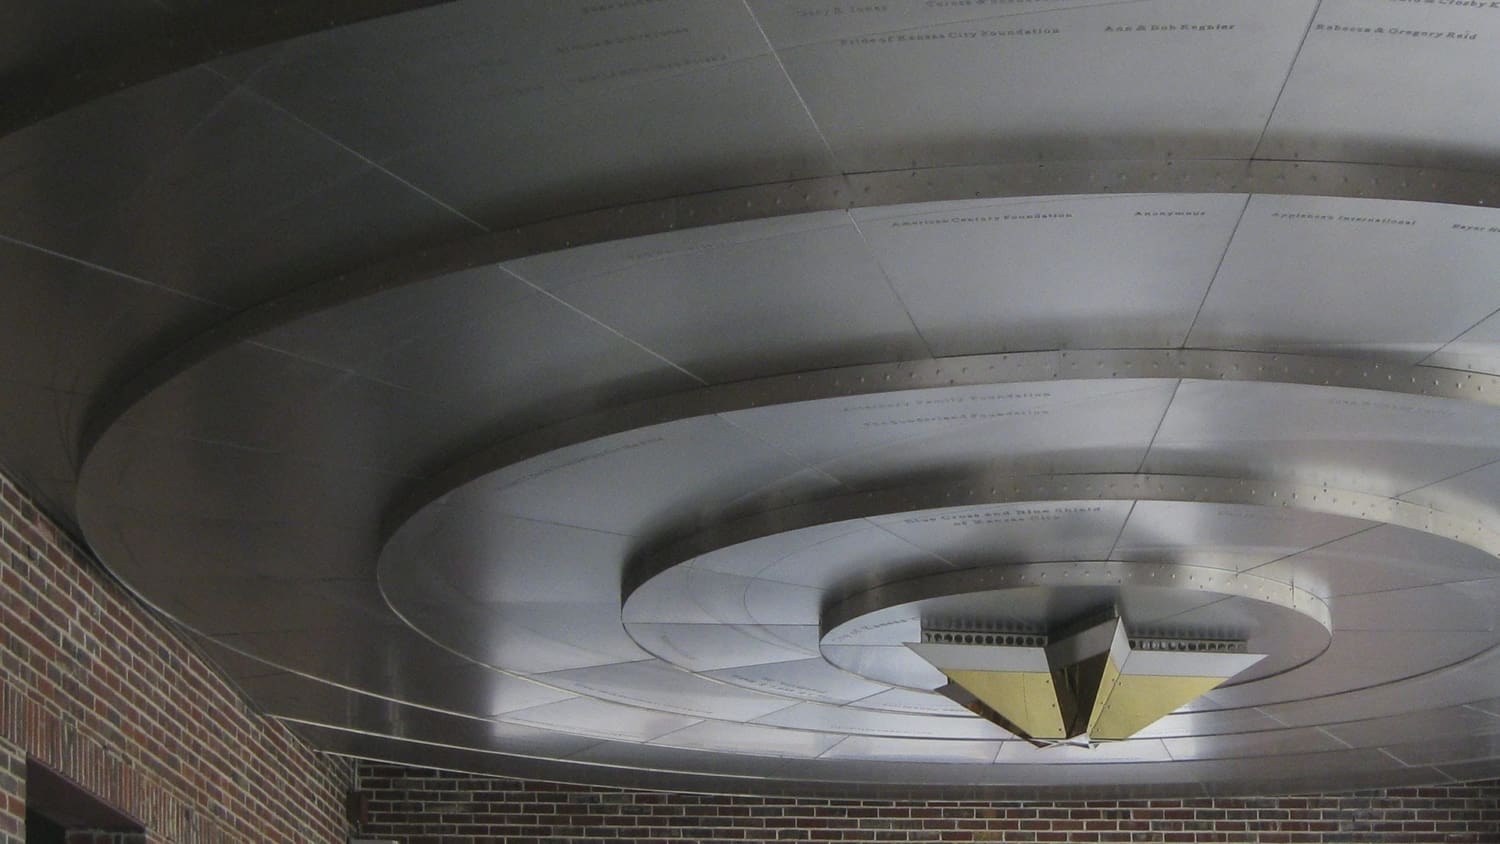 Detail of the metal ceiling system made for the Starlight Theatre Donor's Circle